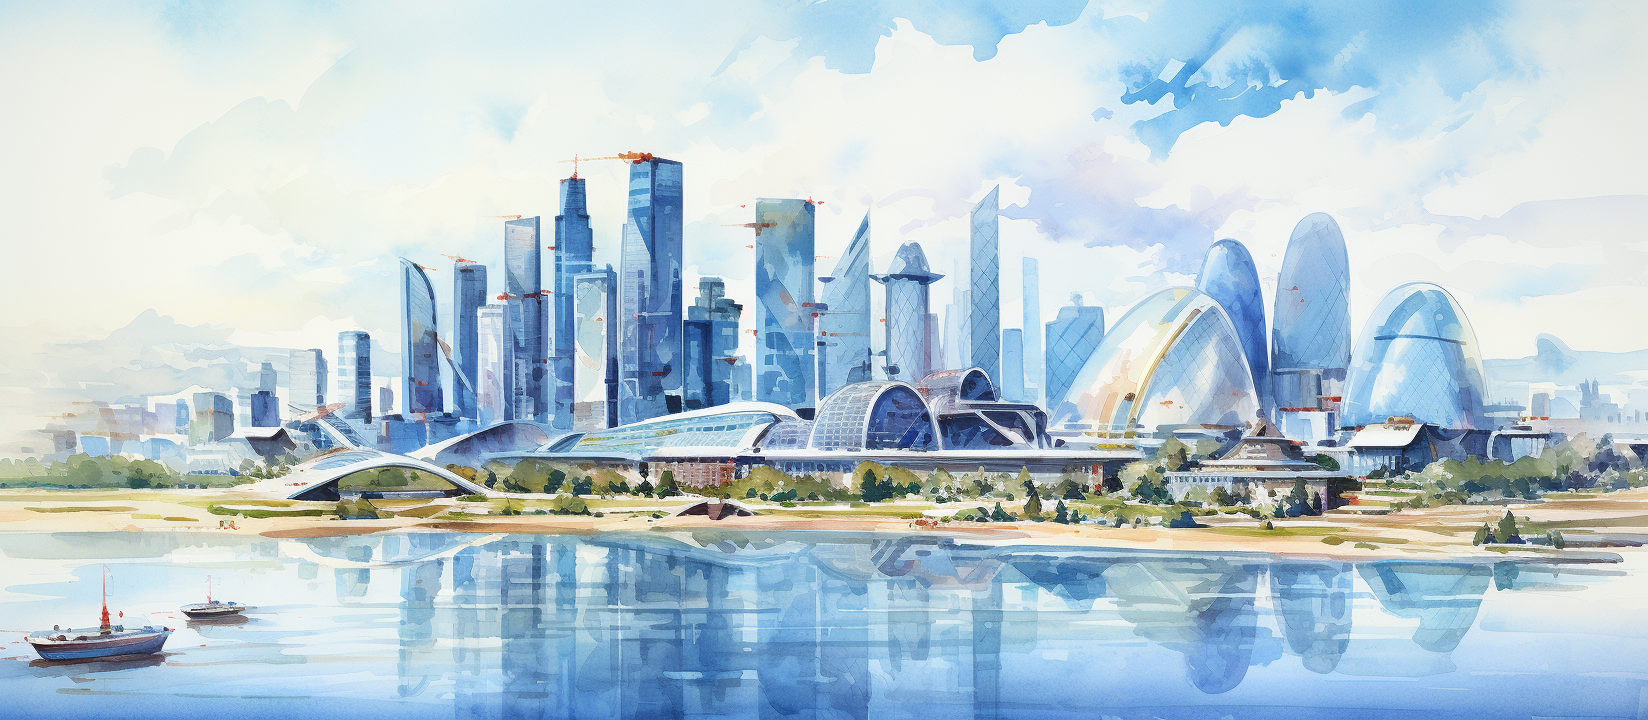 Kazakhstan_of_the_future_watercolor_drawing_aa1762a7-7ff4-4caf-bc39-0a86d845cbae.png